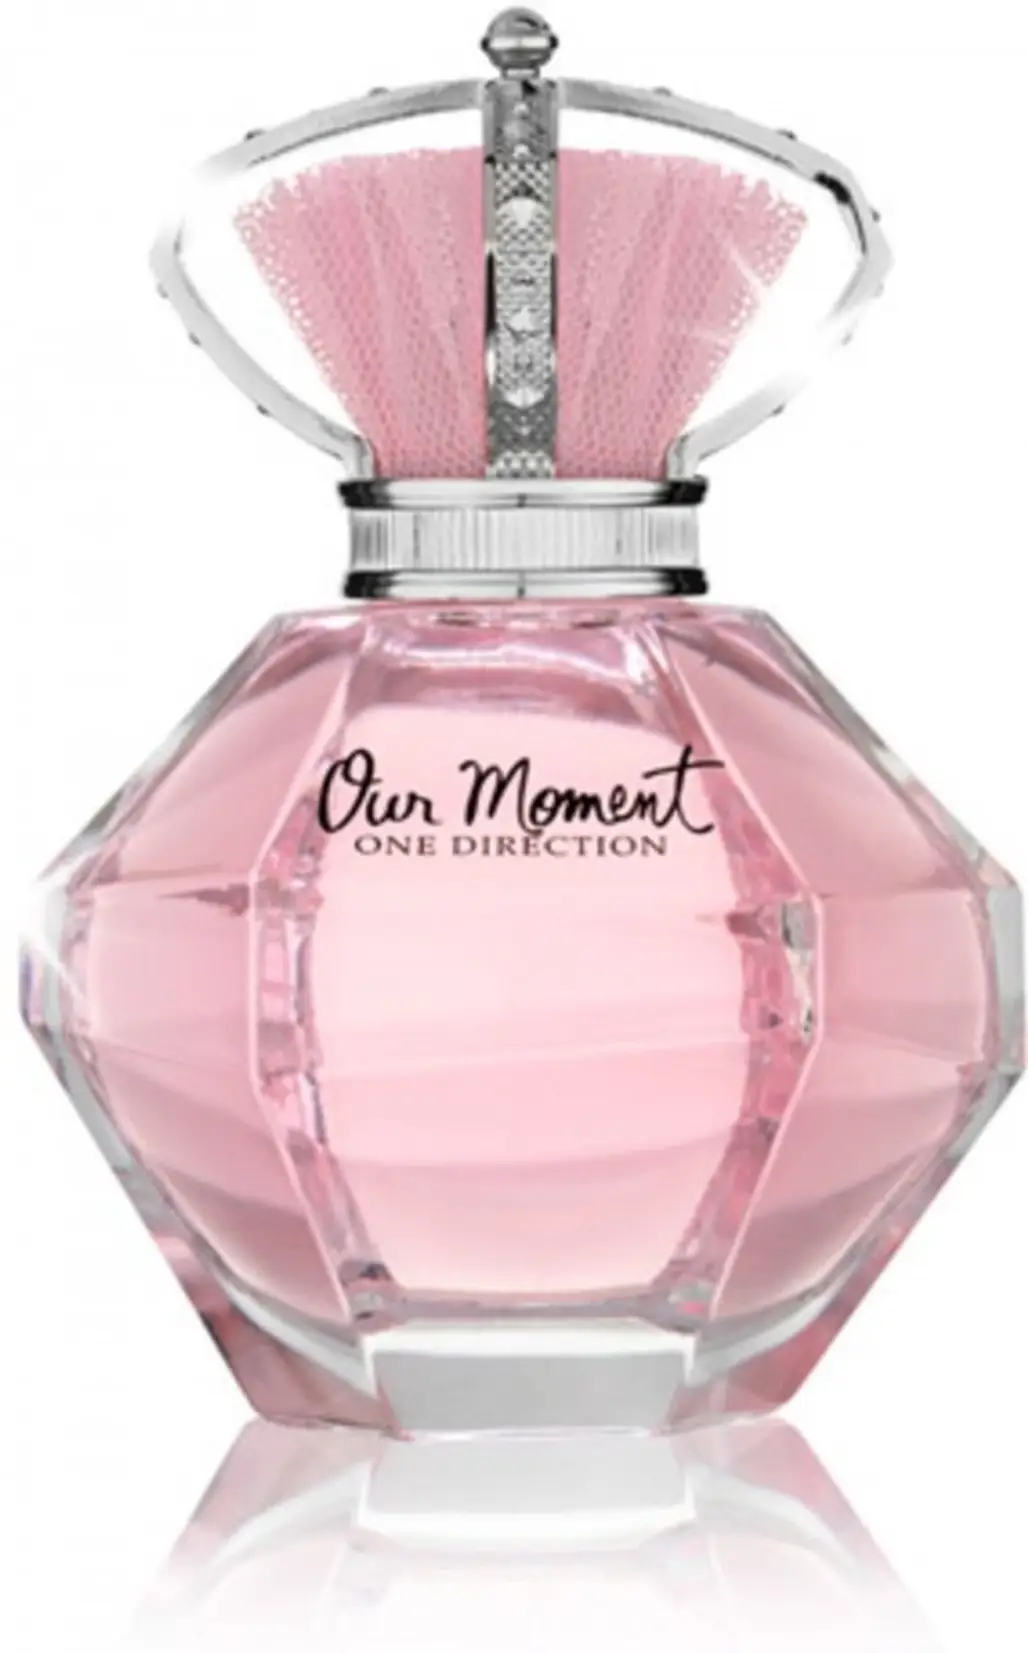 Our Moment Perfume by One Direction